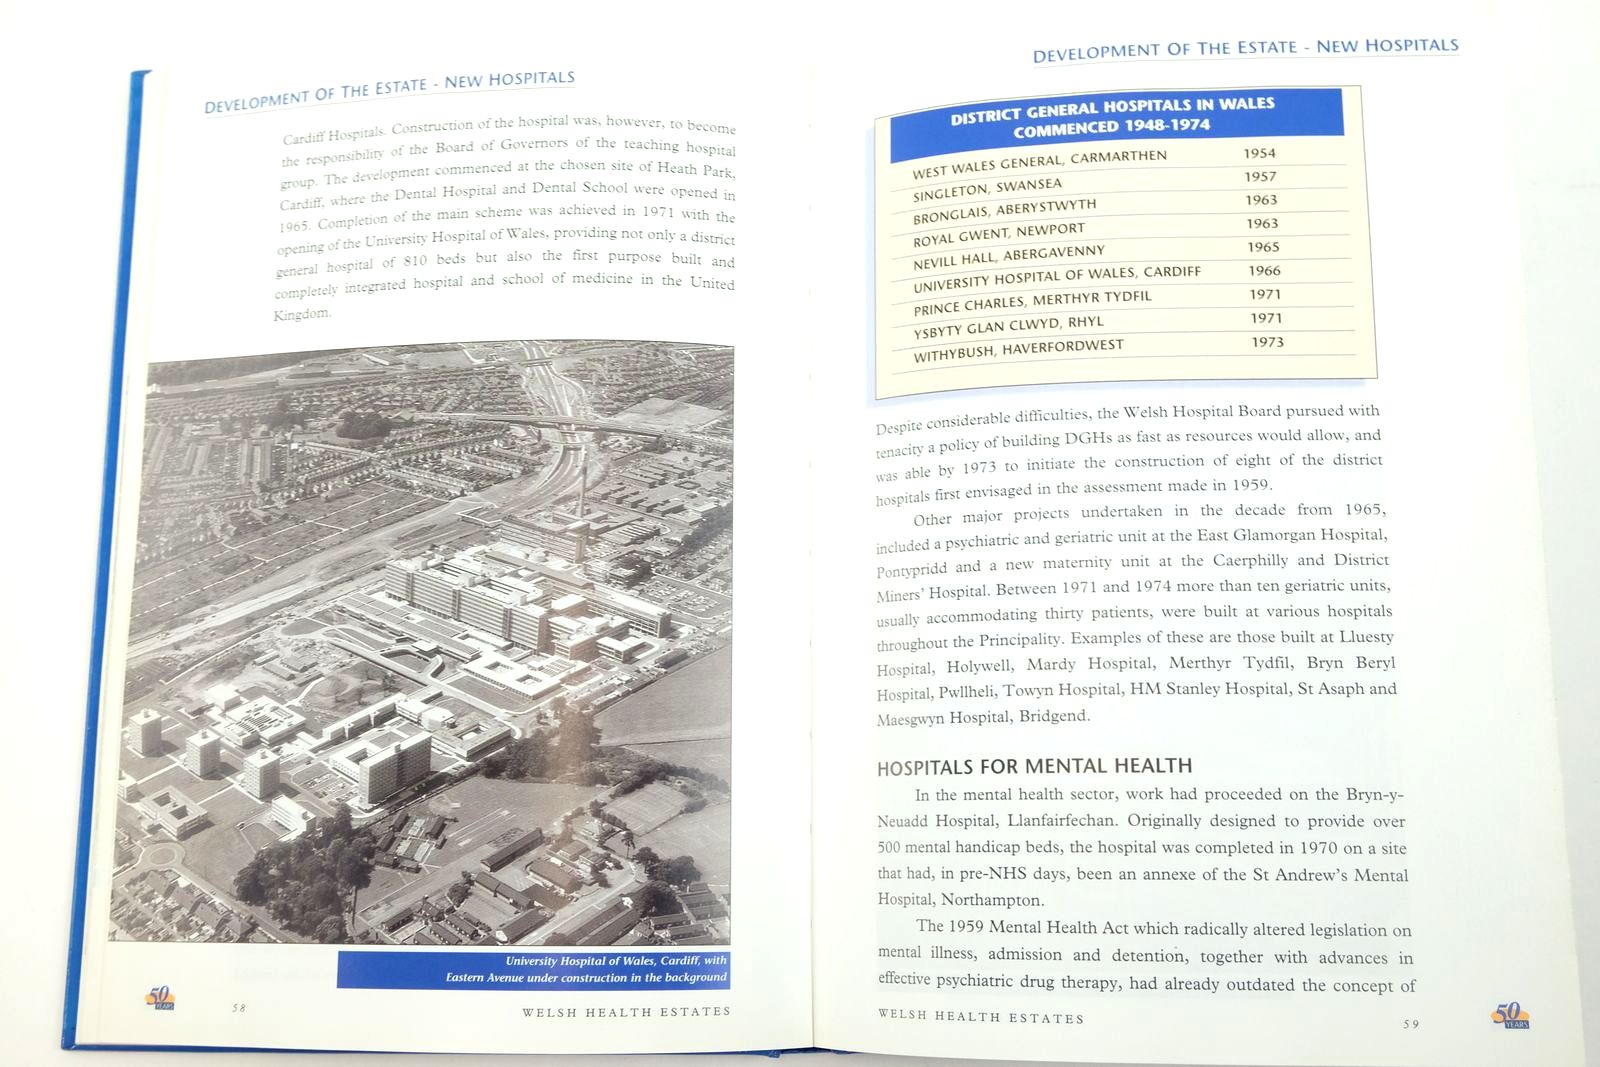 Photo of 50 YEARS OF THE NATIONAL HEALTH SERVICE ESTATE IN WALES 1948 - 1998 written by Griffiths, Delme published by Welsh Health Estates (STOCK CODE: 2139999)  for sale by Stella & Rose's Books